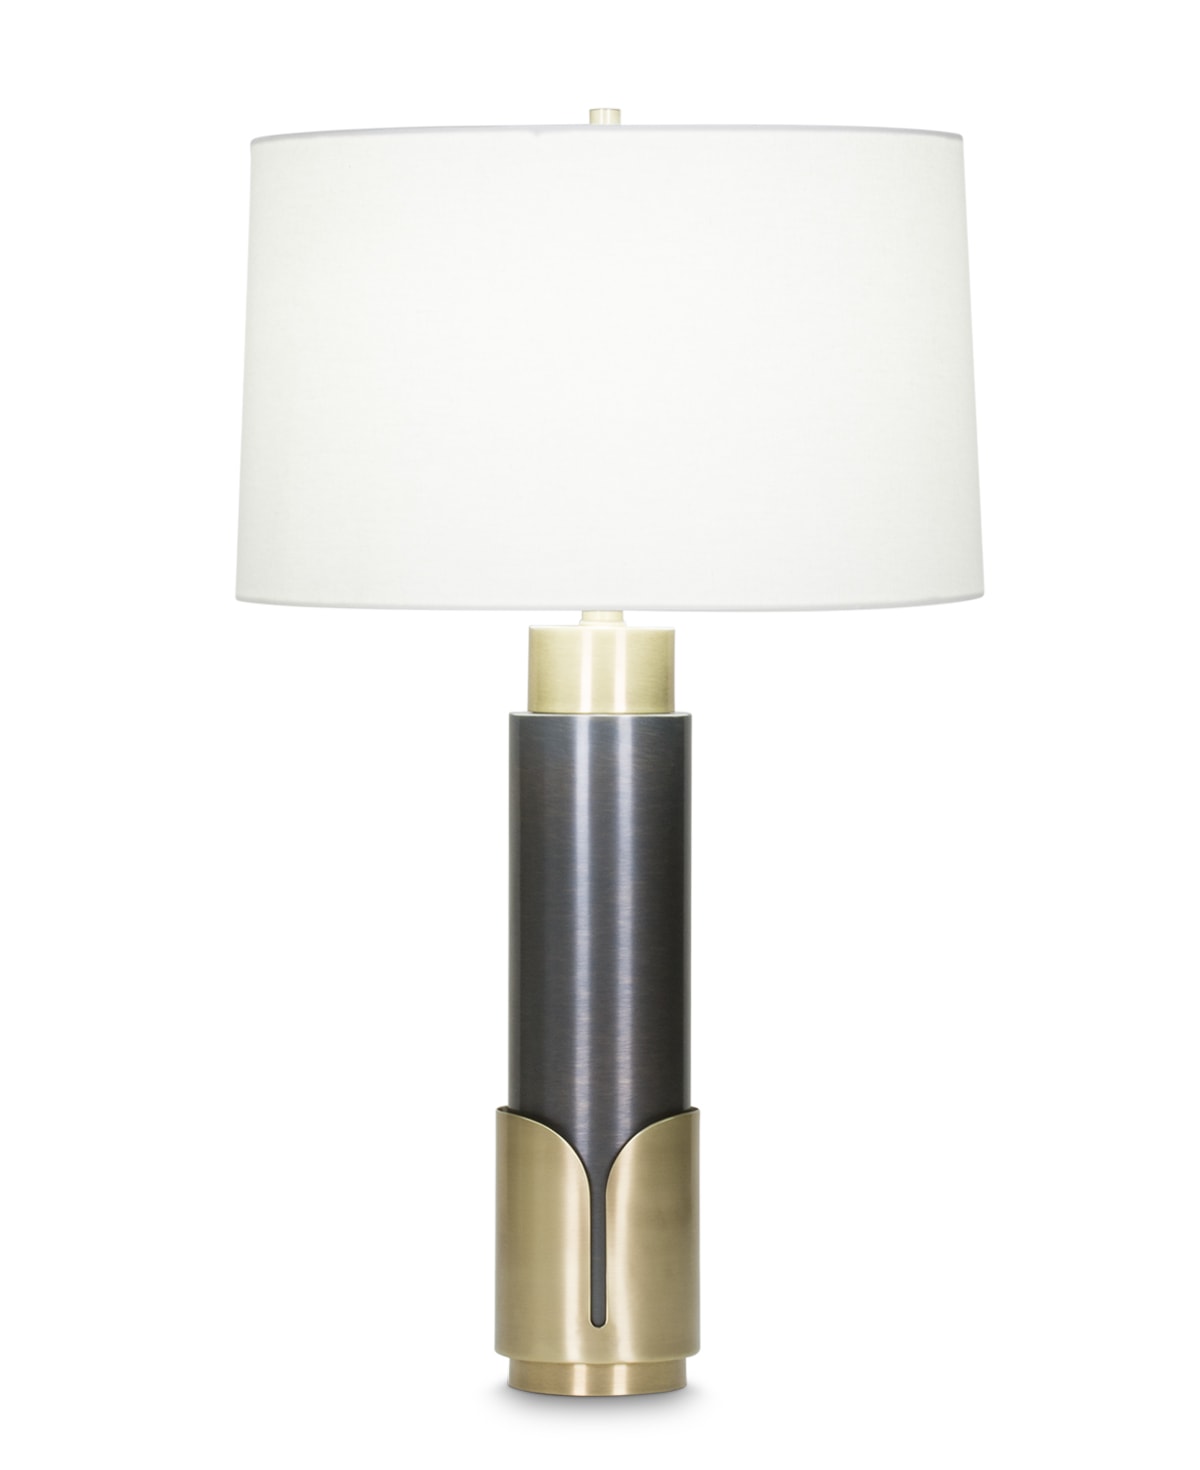 FlowDecor Huxley Table Lamp in metal with antique brass & bronze finishes and off-white linen tapered drum shade (# 4050)